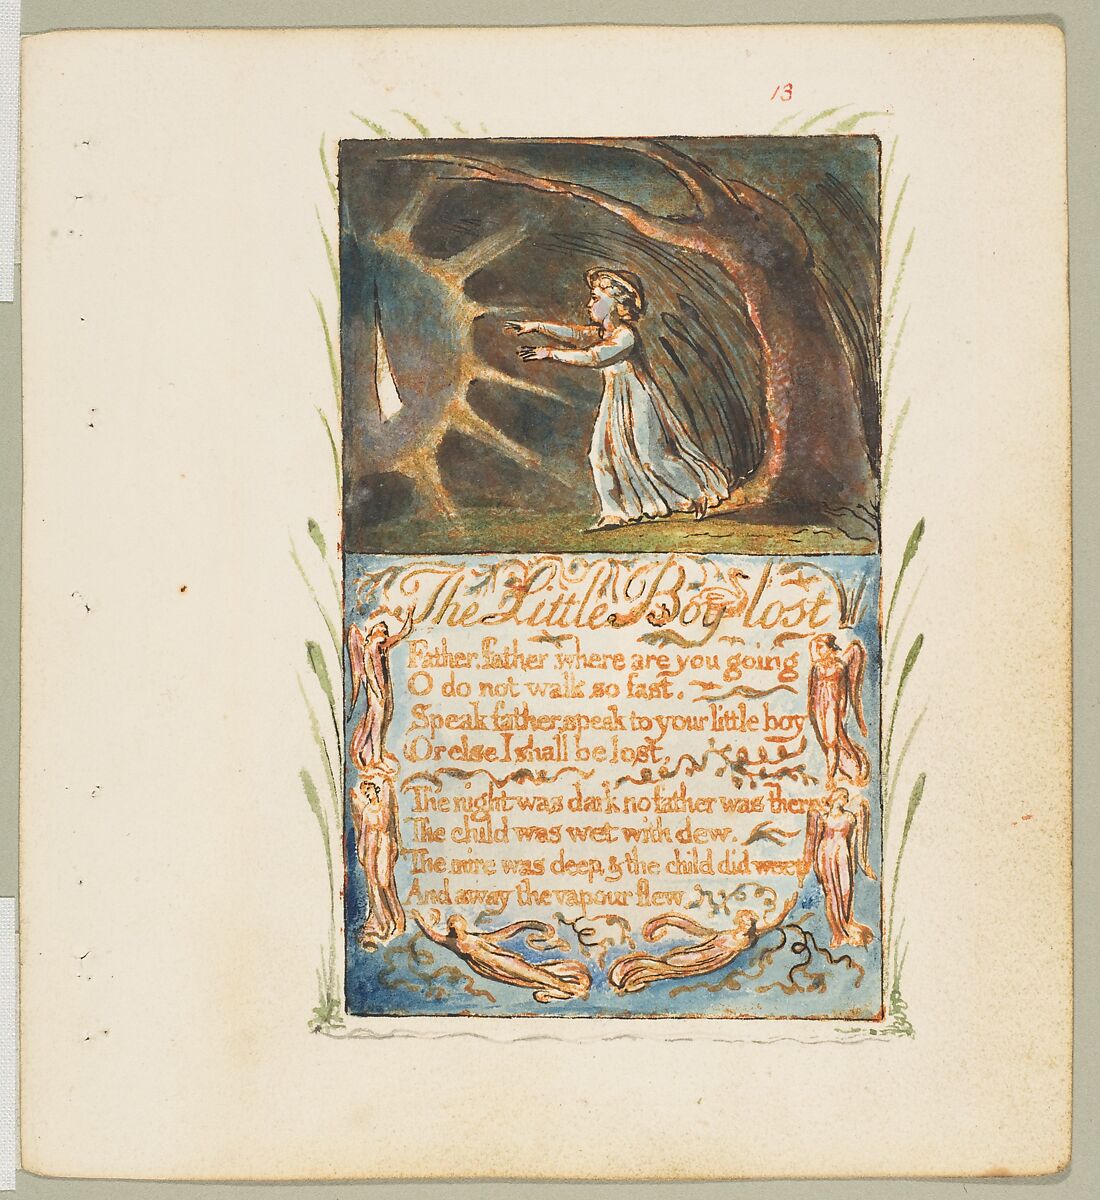 Songs of Innocence: Little Boy Lost, William Blake  British, Relief etching printed in orange-brown ink and hand-colored with watercolor and shell gold